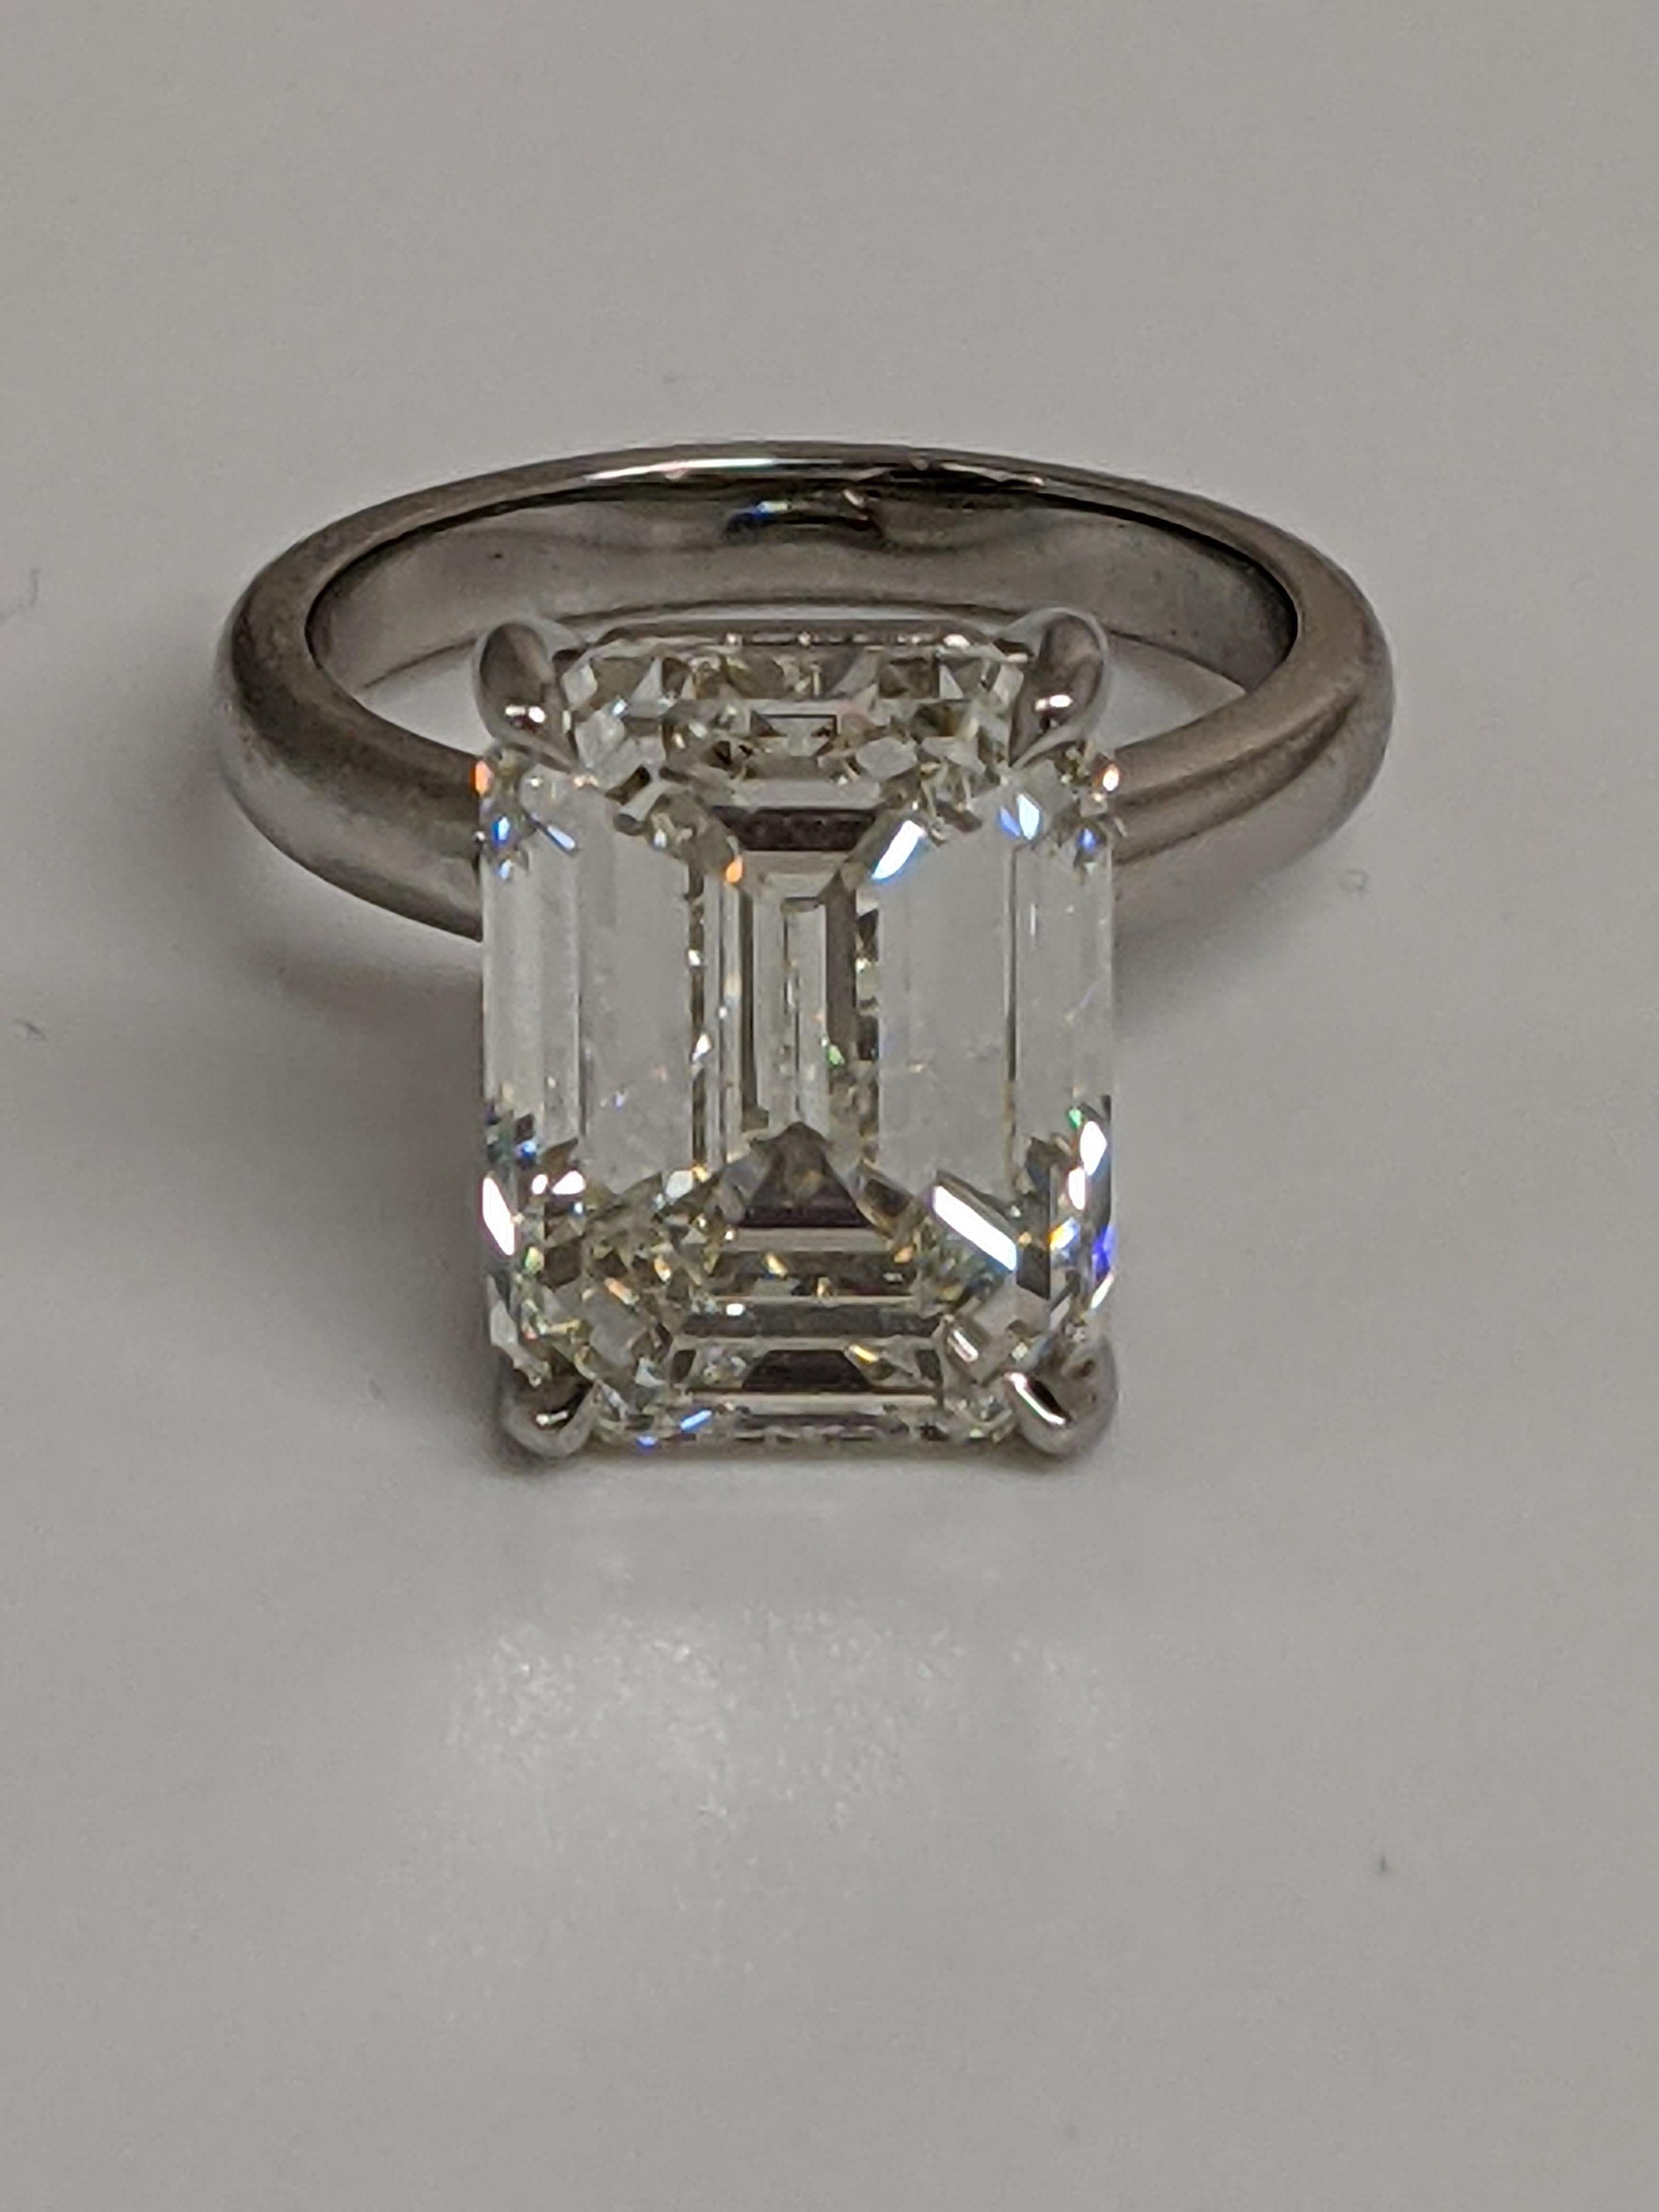 The ultmate Emerald Cut Solitaire this classic 10.01 carat Emerald Cut diamond is graded by GIA as K VS2 and is an absolute stunner.  Classically set as a platinum solitaire it takes you wherever you need to shine.  Available as is or in a custom